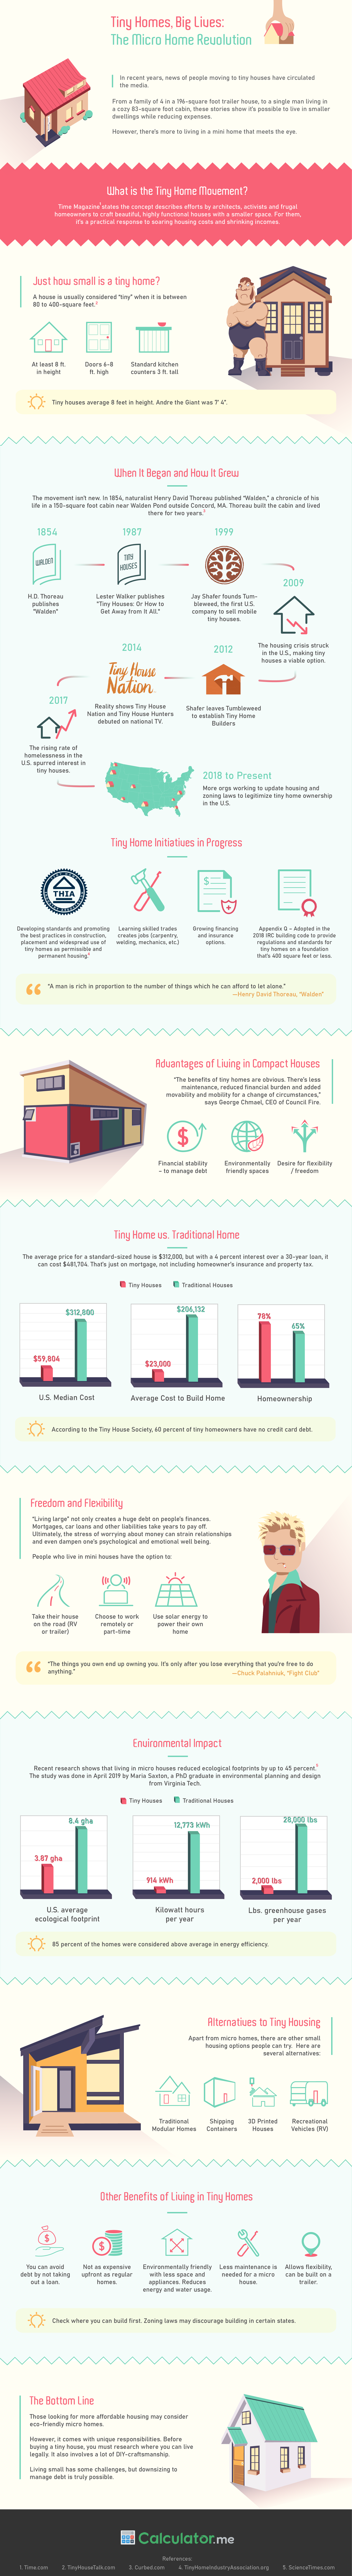 Tinyhouse Infographic by Calculator.me